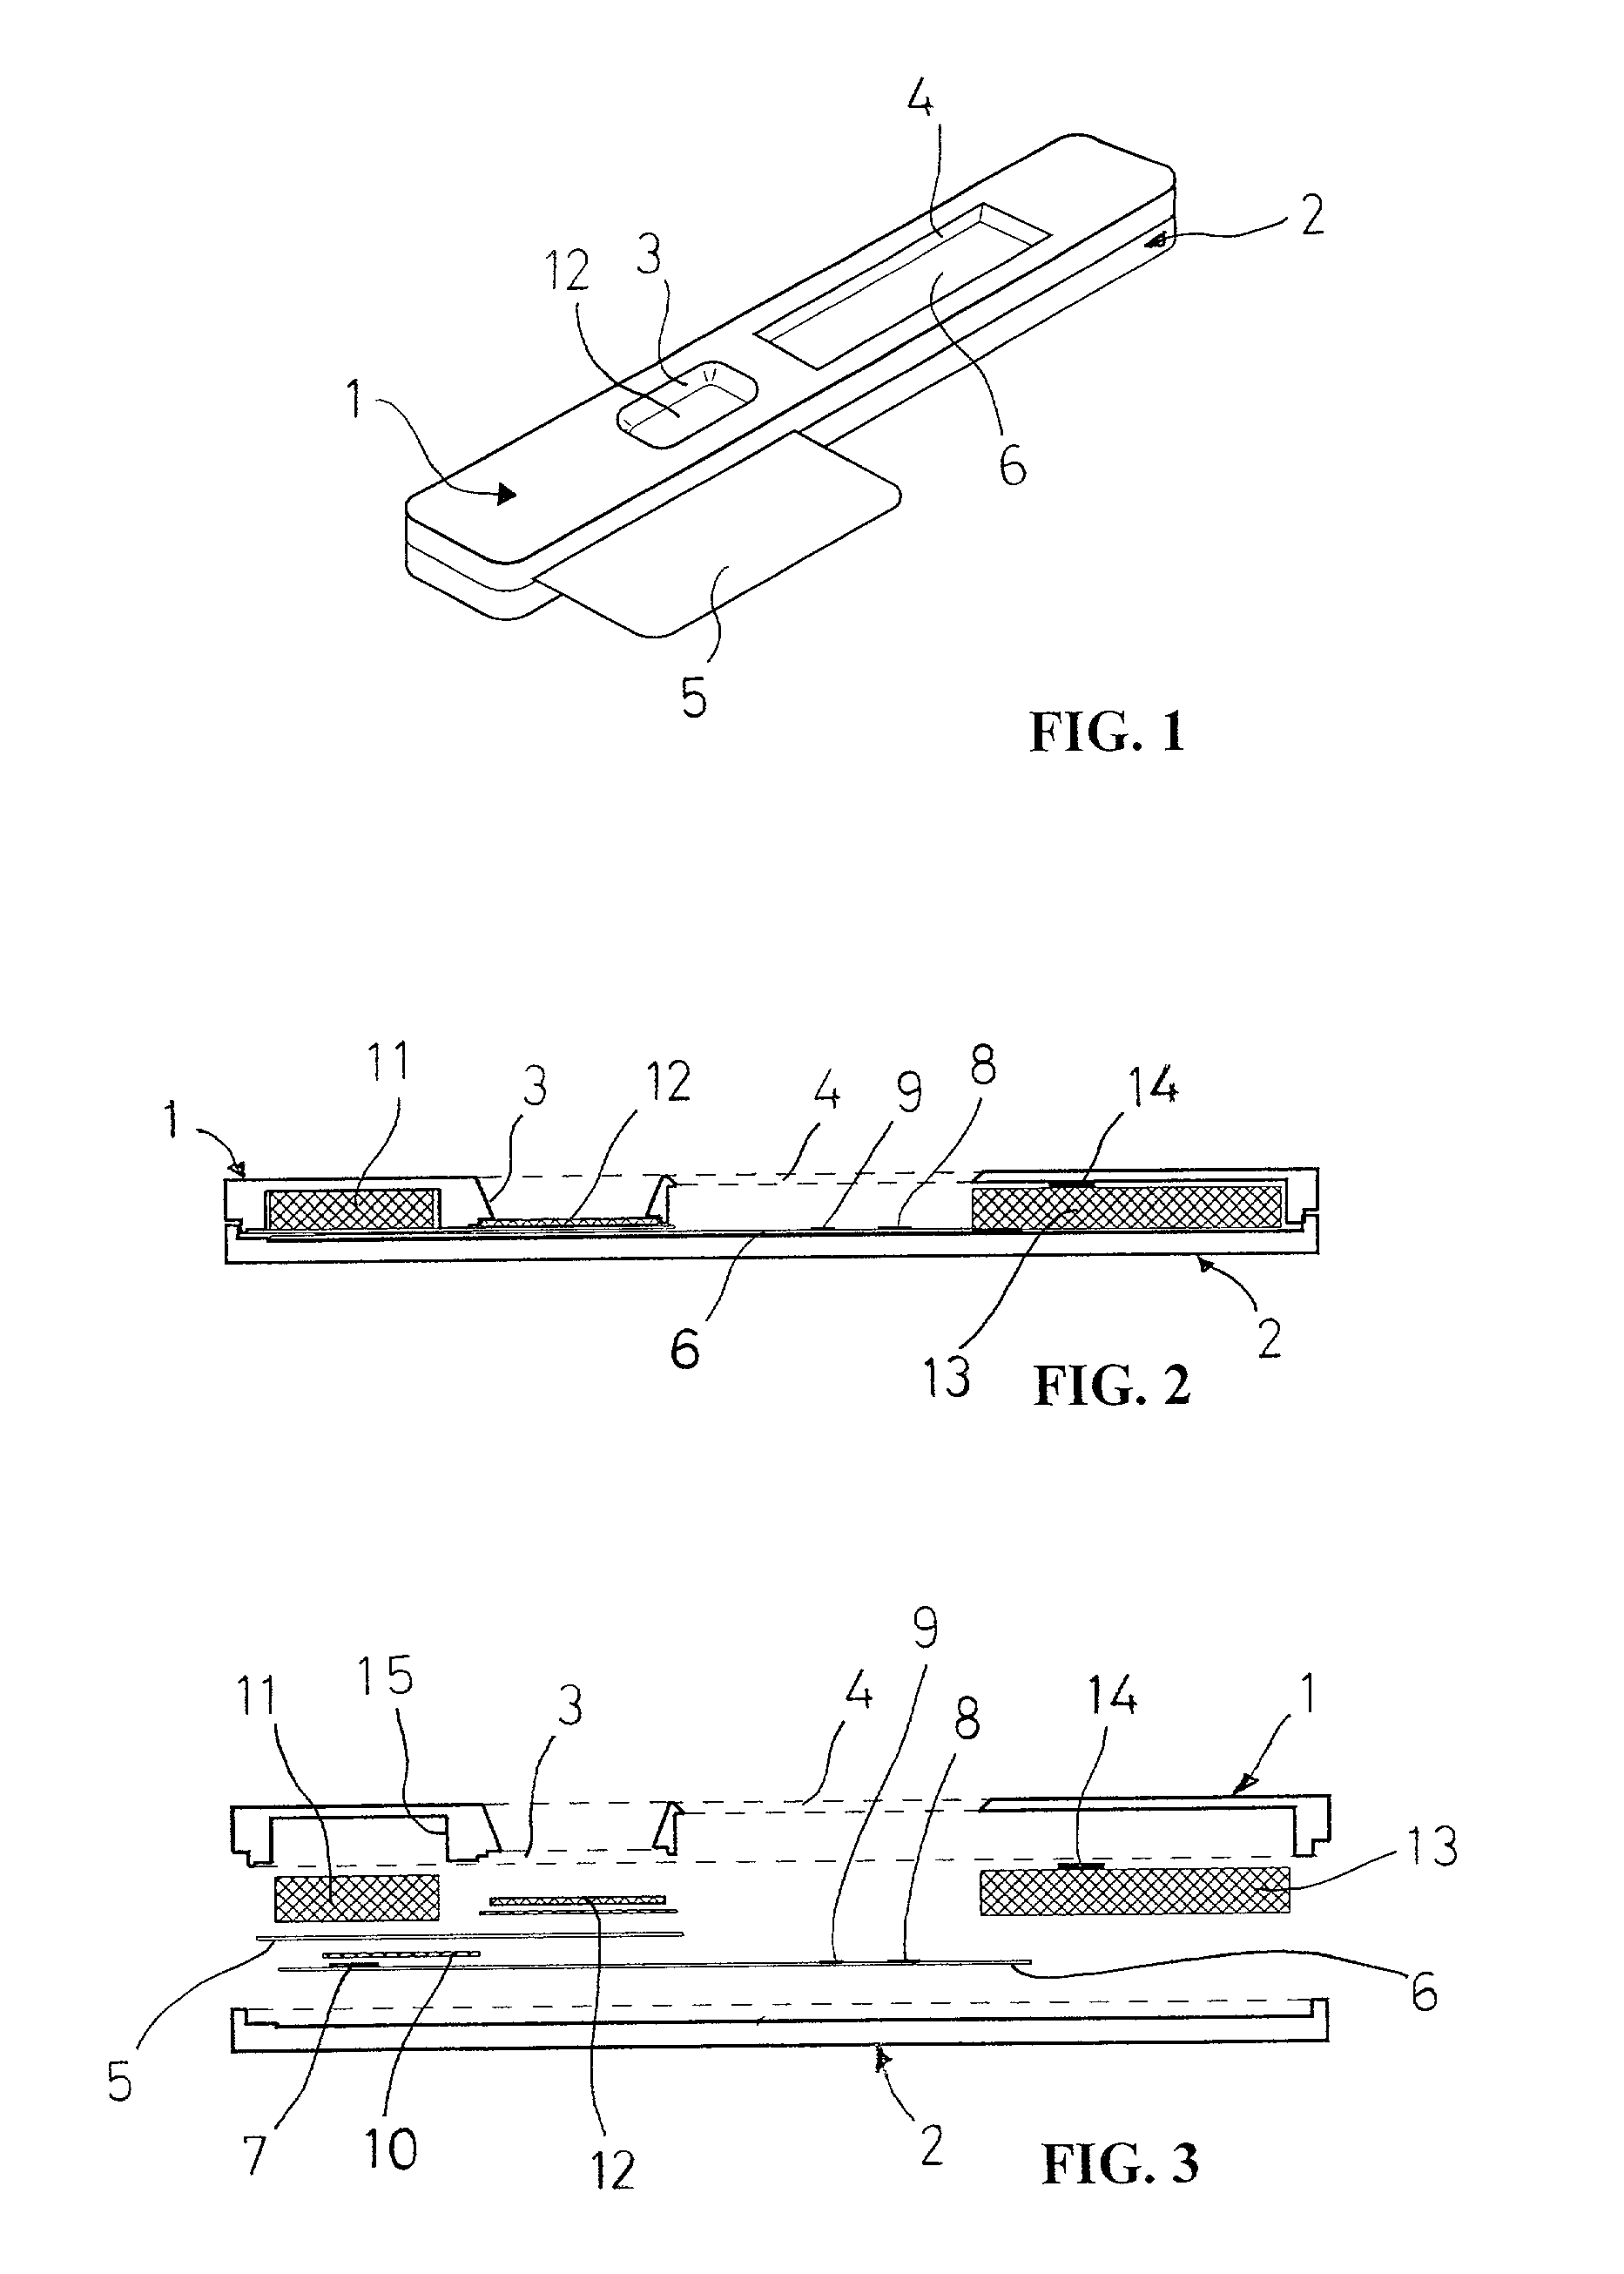 Assay device with timer function